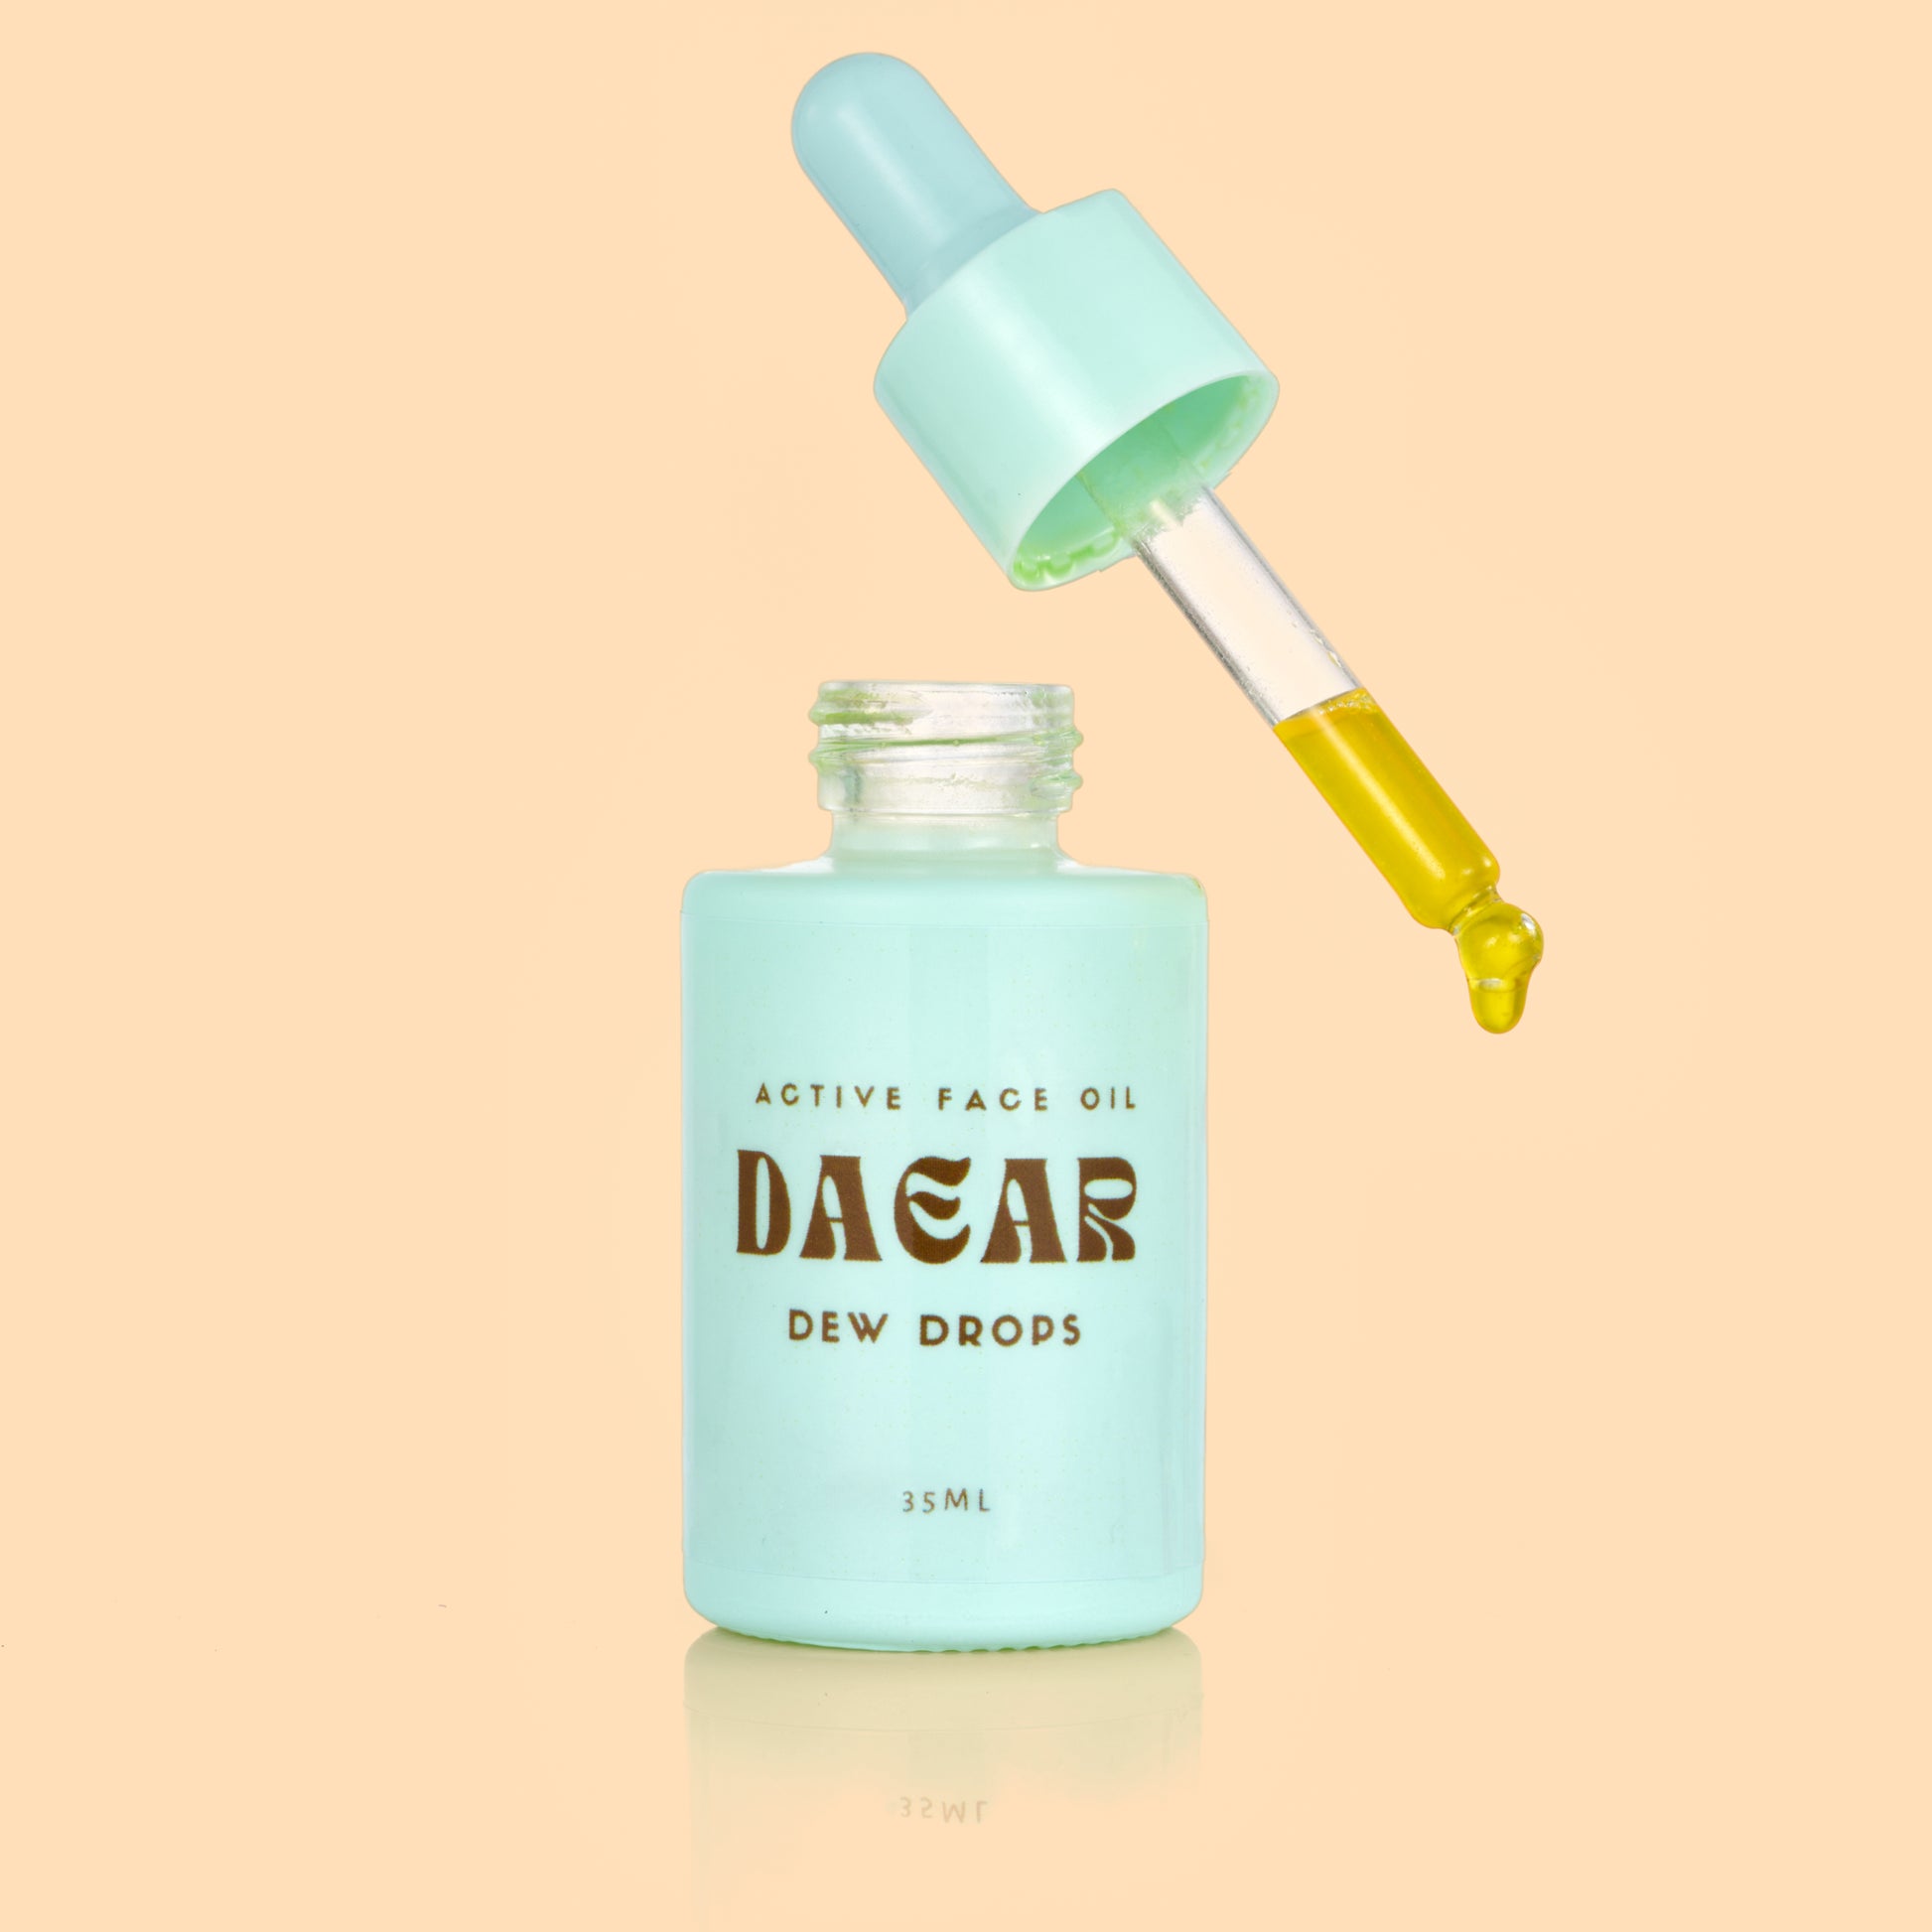 Daear Dew Drops Active Face Oil bottle with ingredients like Emu Oil